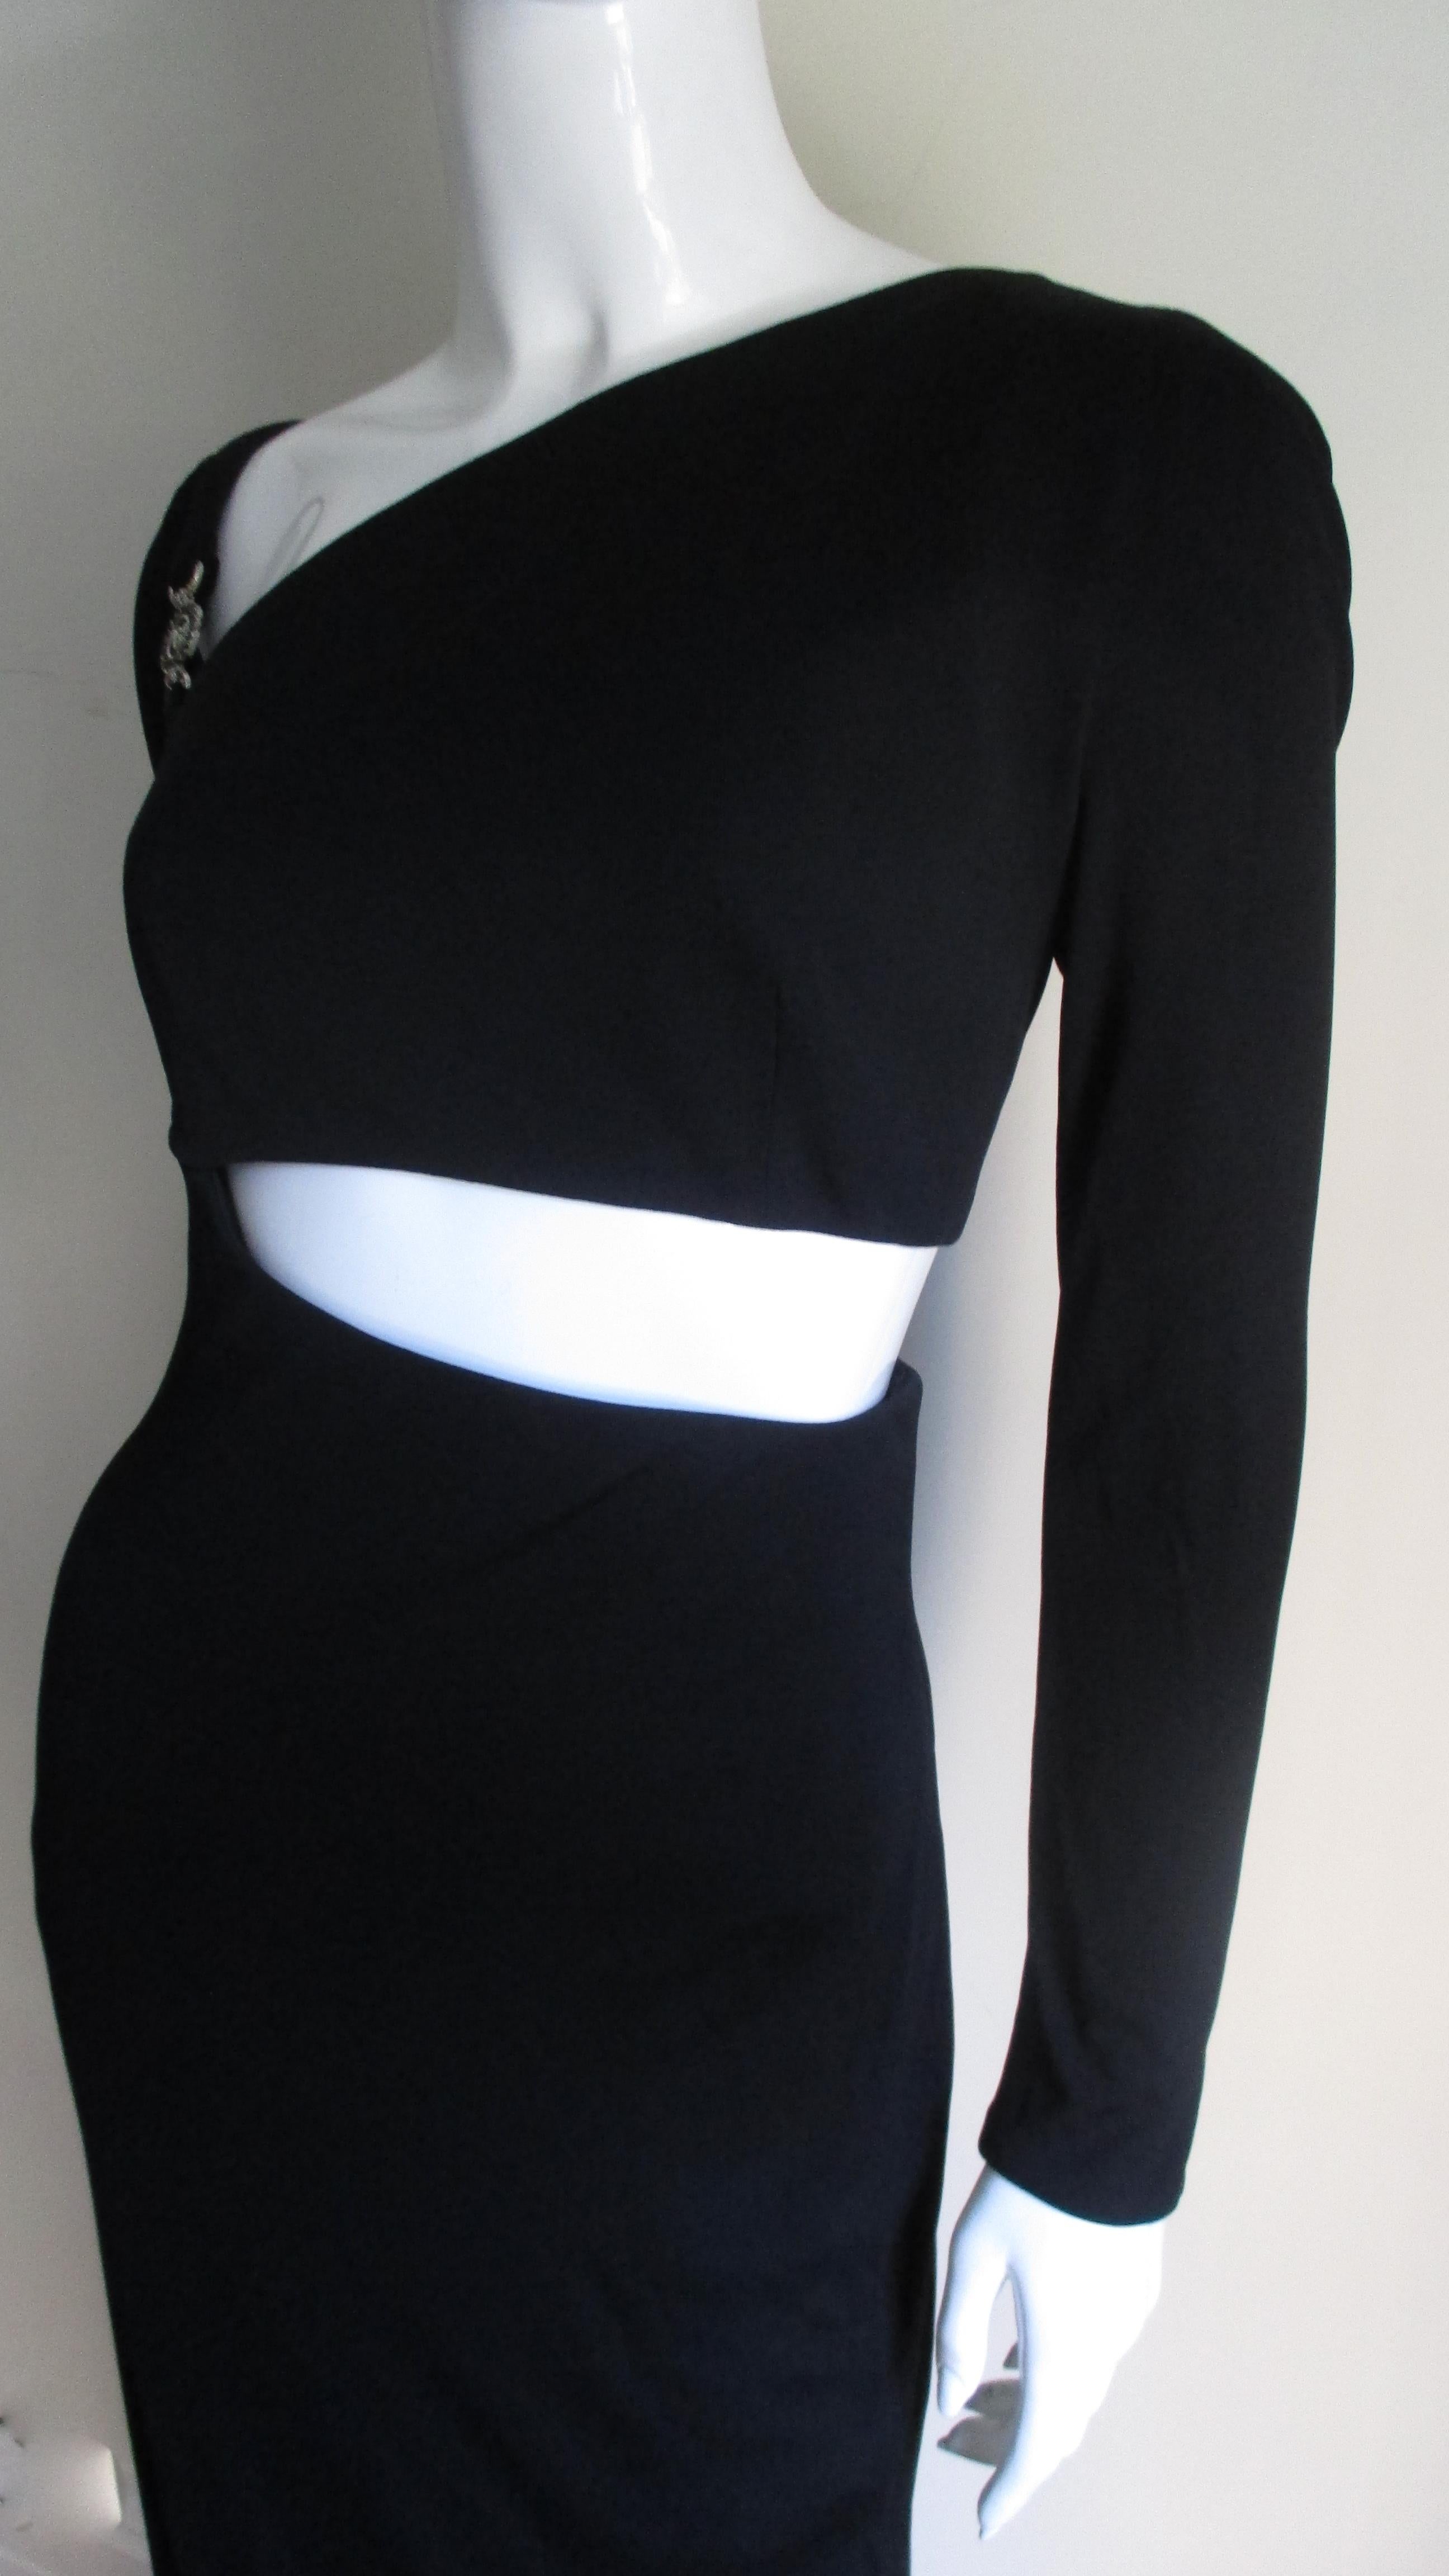 Black 1990s Gianni Versace Vintage Cutout Dress with Hardware